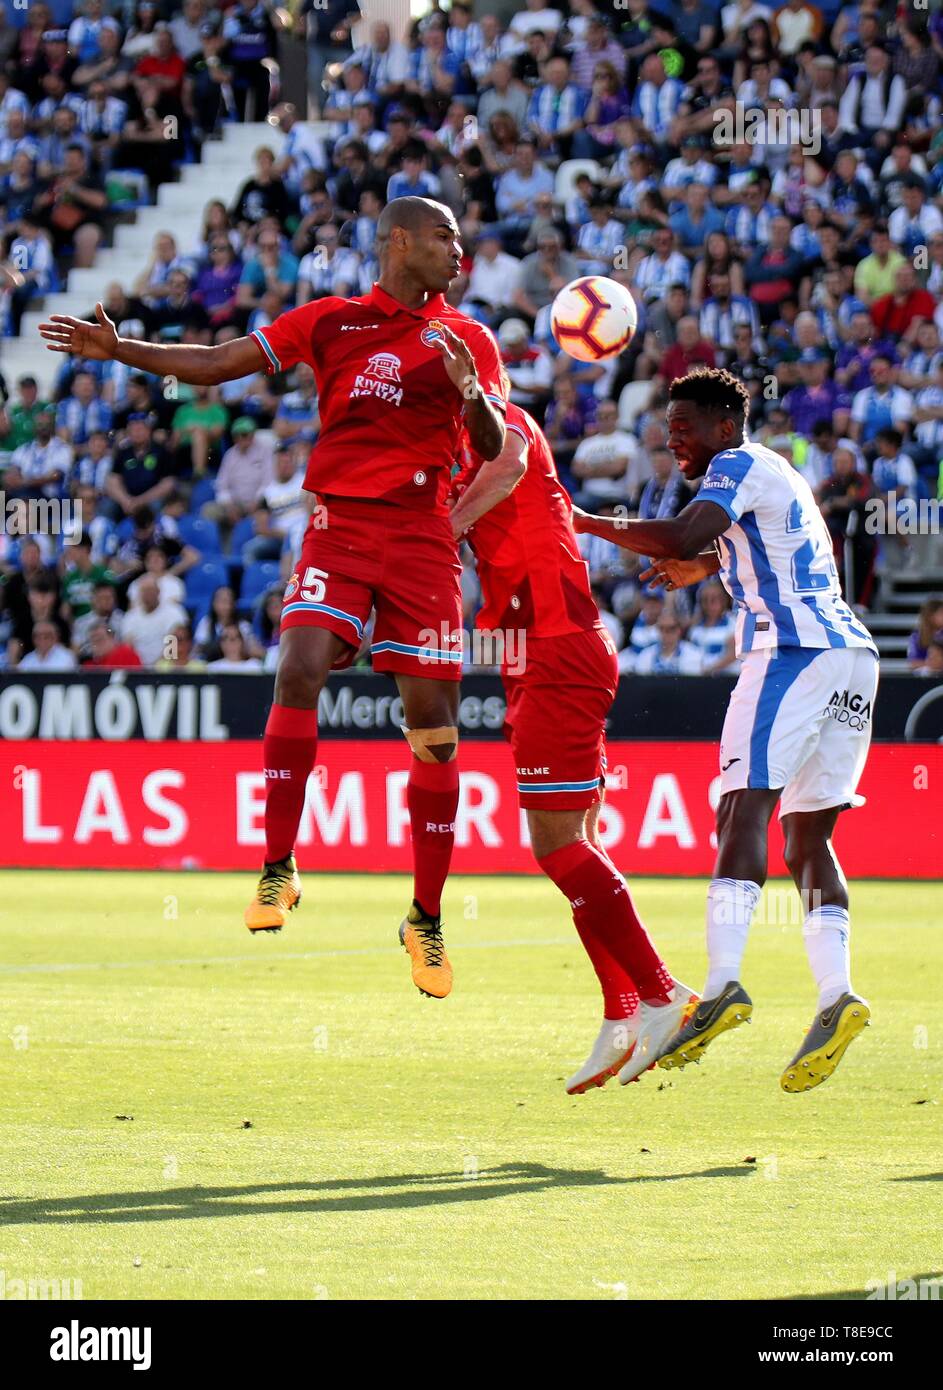 Madrid, Spain. 12th May, 2019. Leganes' Kenneth Omeruo (R) vies with Espanyol's Naldo (L) during a Spanish League soccer match between Leganes and RCD Espanyol in Madrid, Spain, May 12, 2019. Espanyol won 2-0. Credit: Edward F. Peters/Xinhua/Alamy Live News Stock Photo